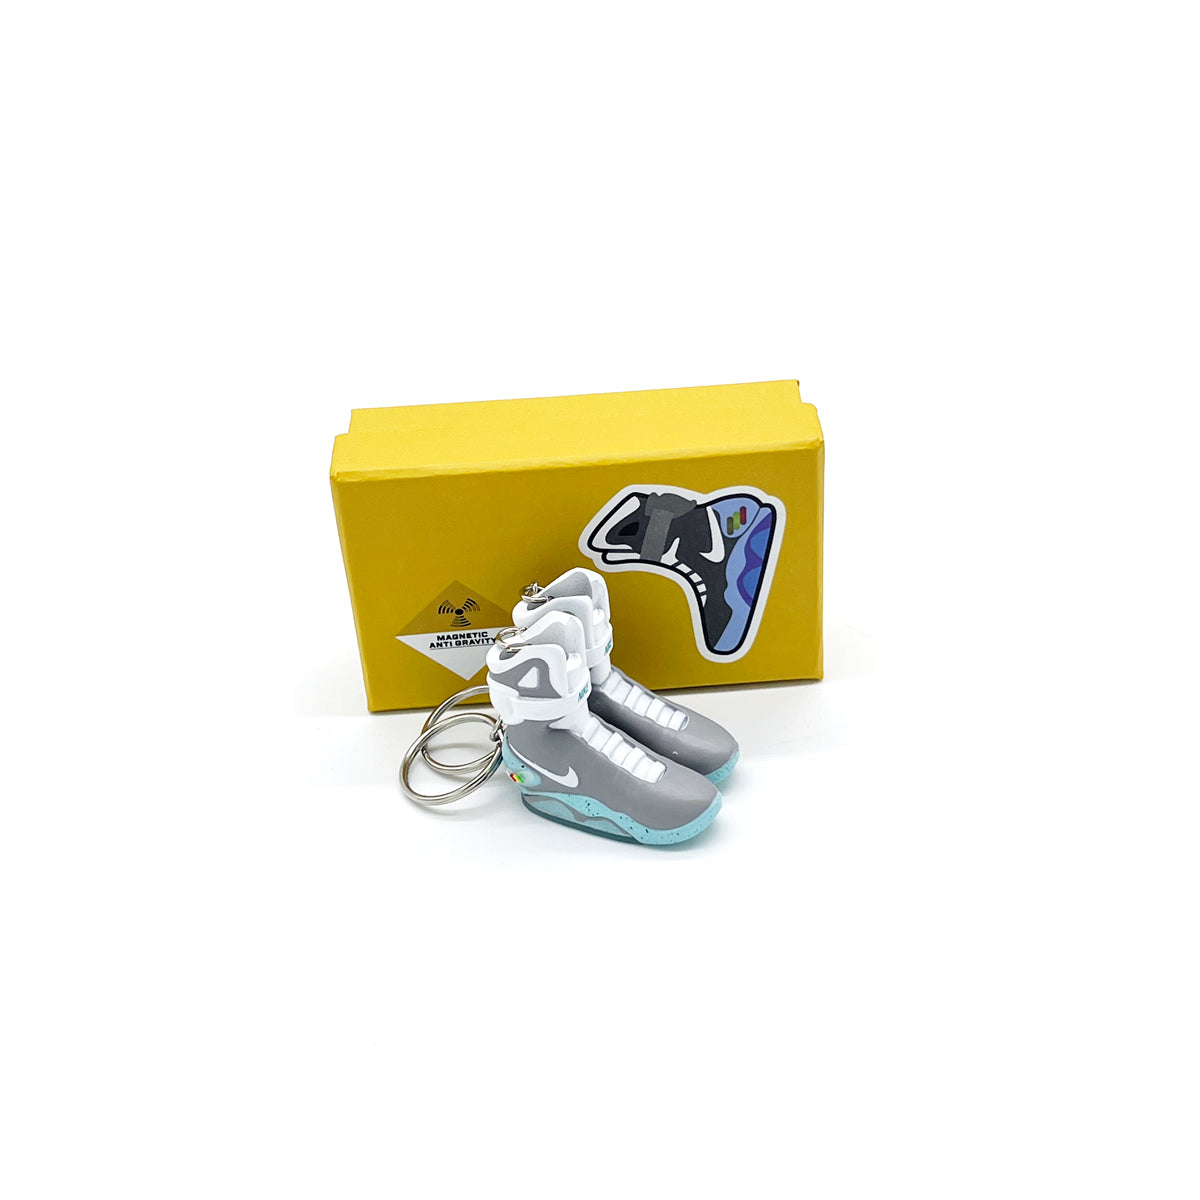 3D Sneaker Keychain- Nike Air Mag Back To The Future Pair